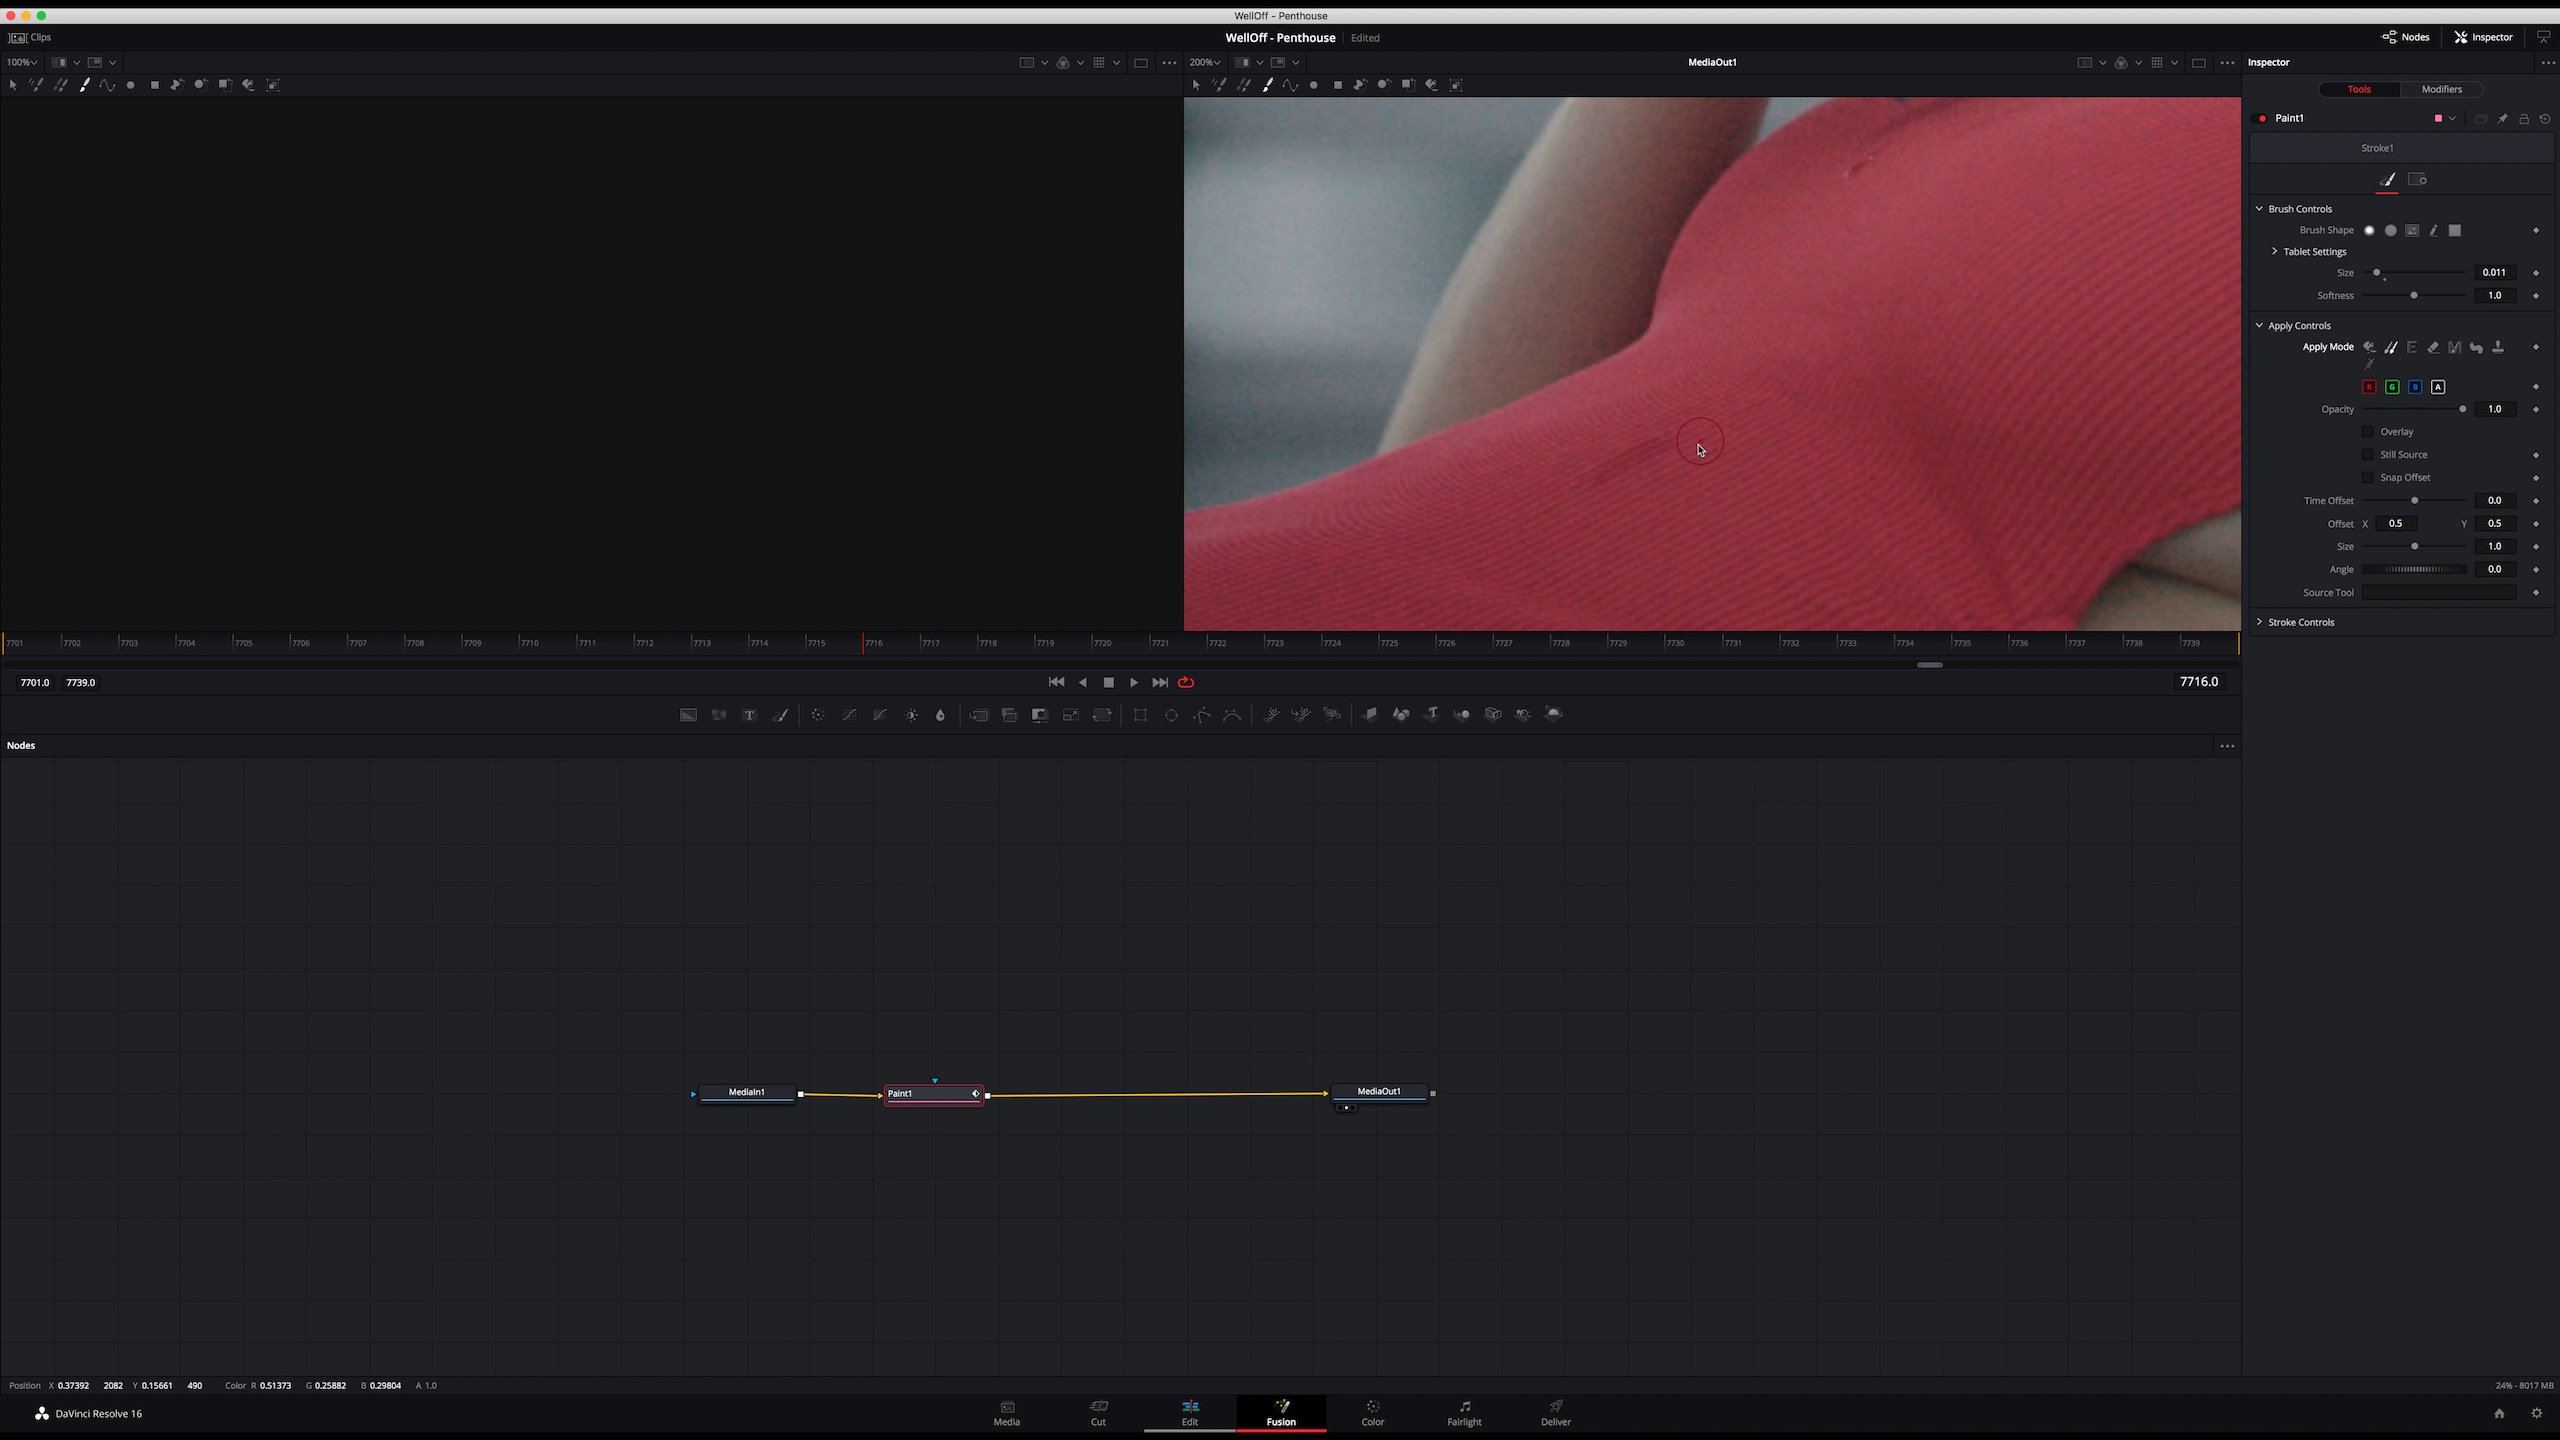 BlackMagic Design Editfest 2020 with screenshot of editing software on computer